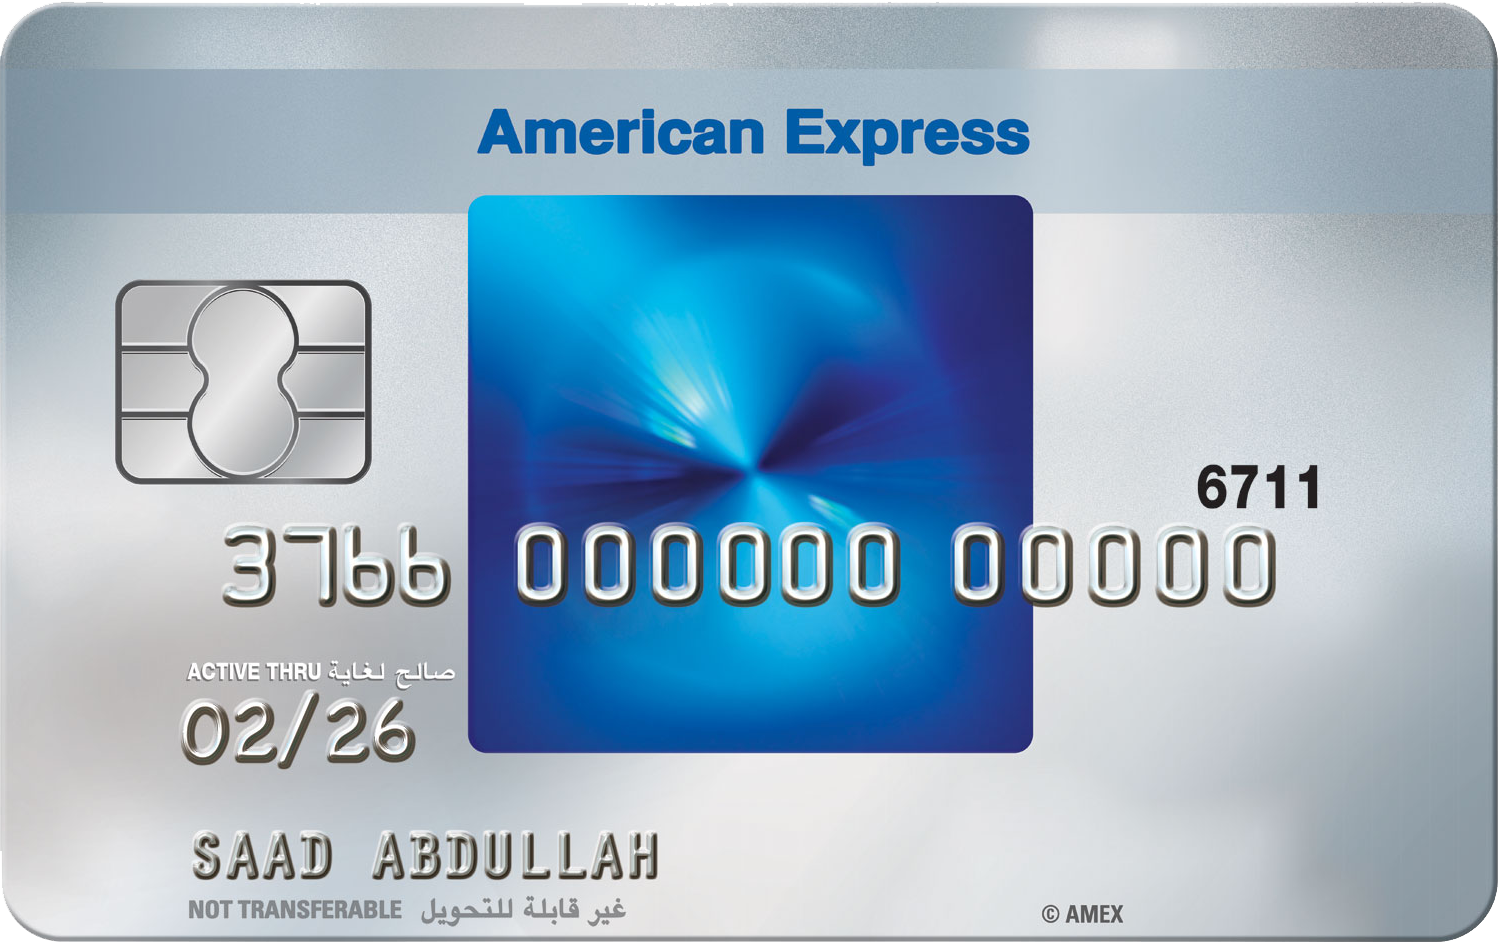 The American Express Blue Card